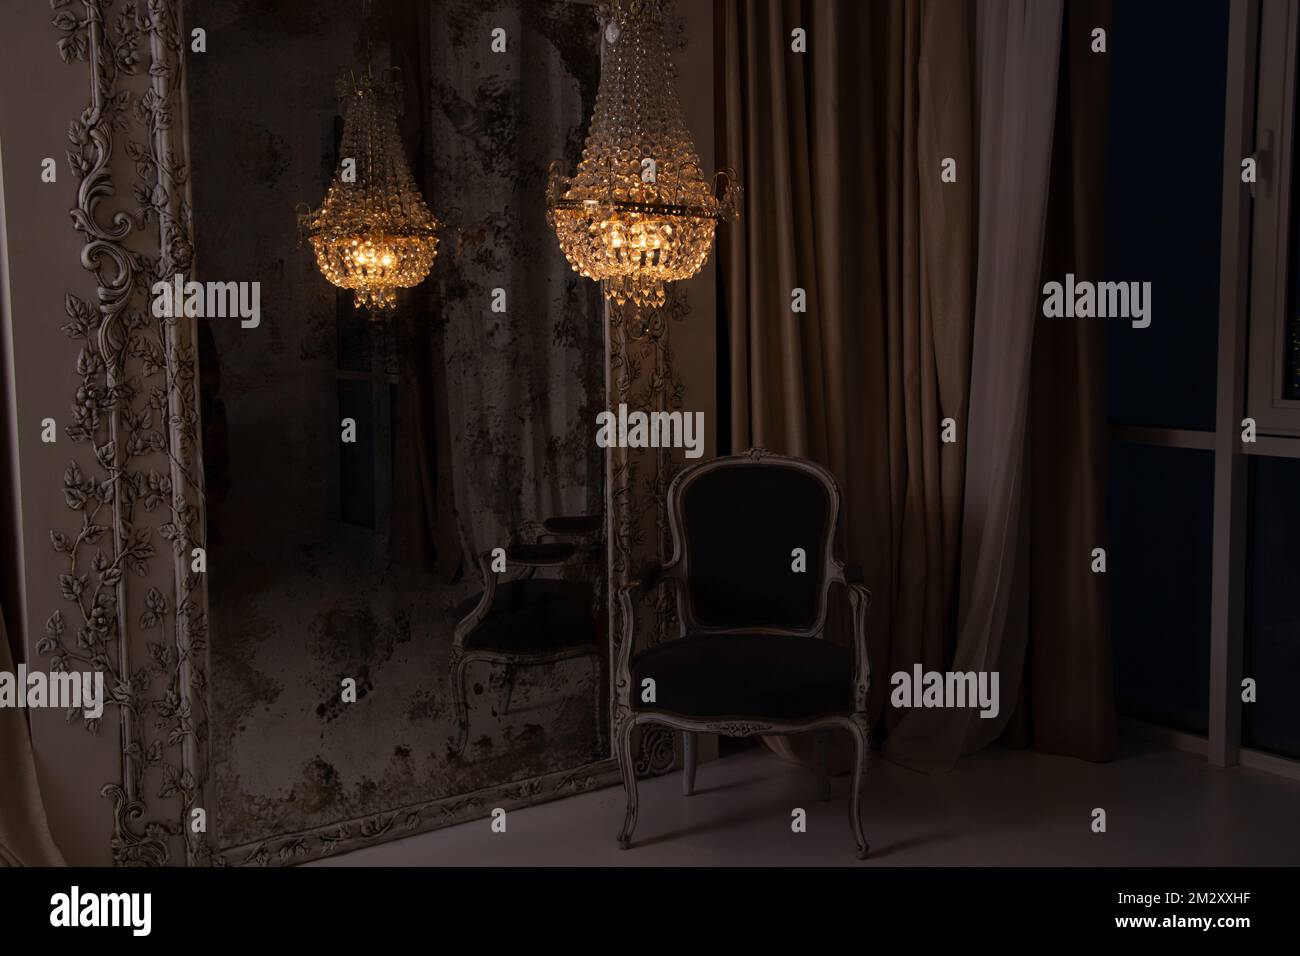 A crystal old chandelier hangs near the mirror and there is a chair next to the house in the evening near the window, apartment interior Stock Photo